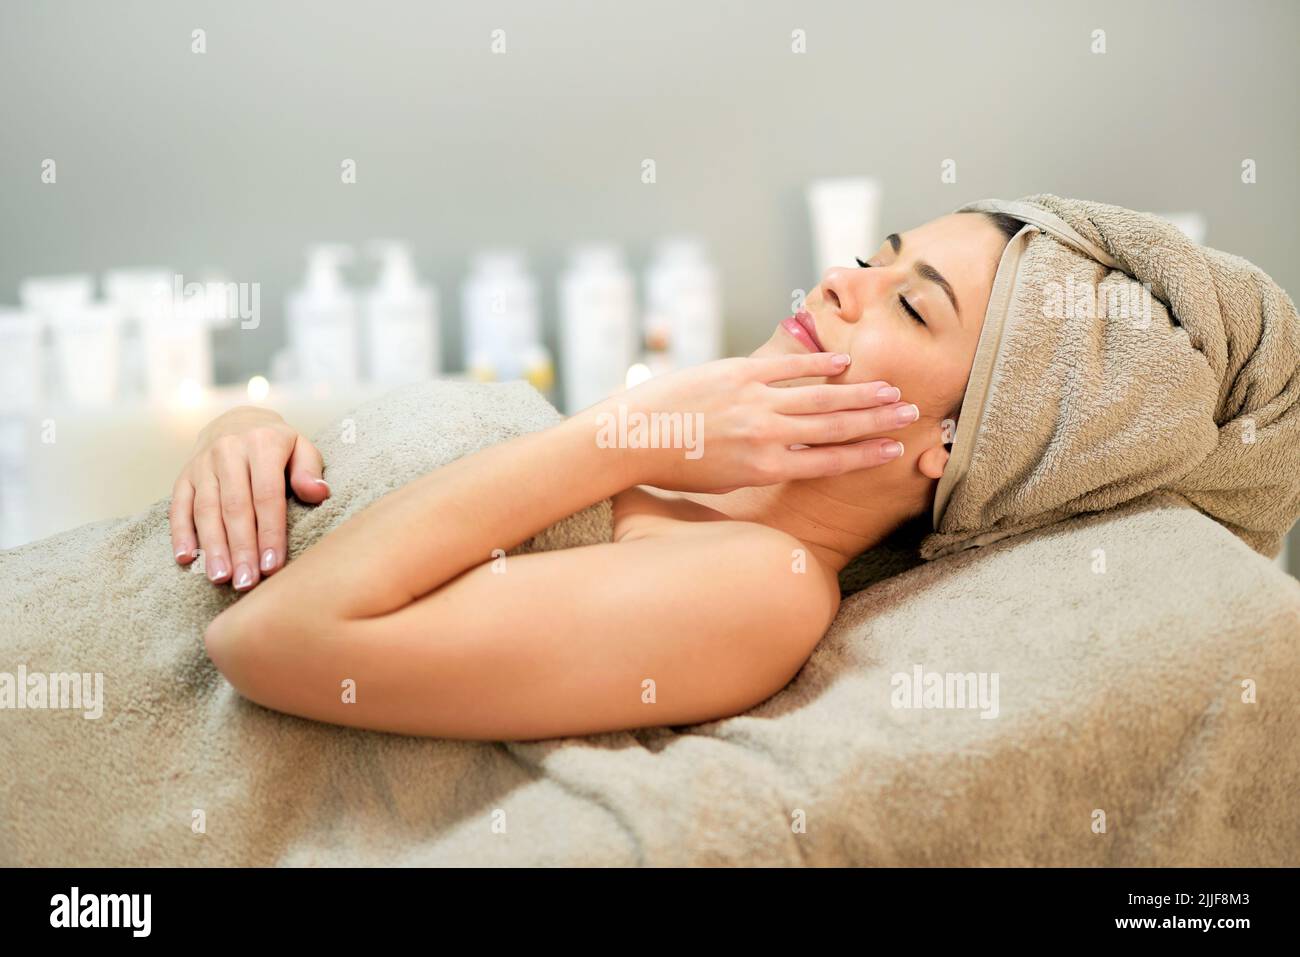 Side view of relaxed female client wrapped in towel touching cheek while lying on couch during spa procedure in salon Stock Photo